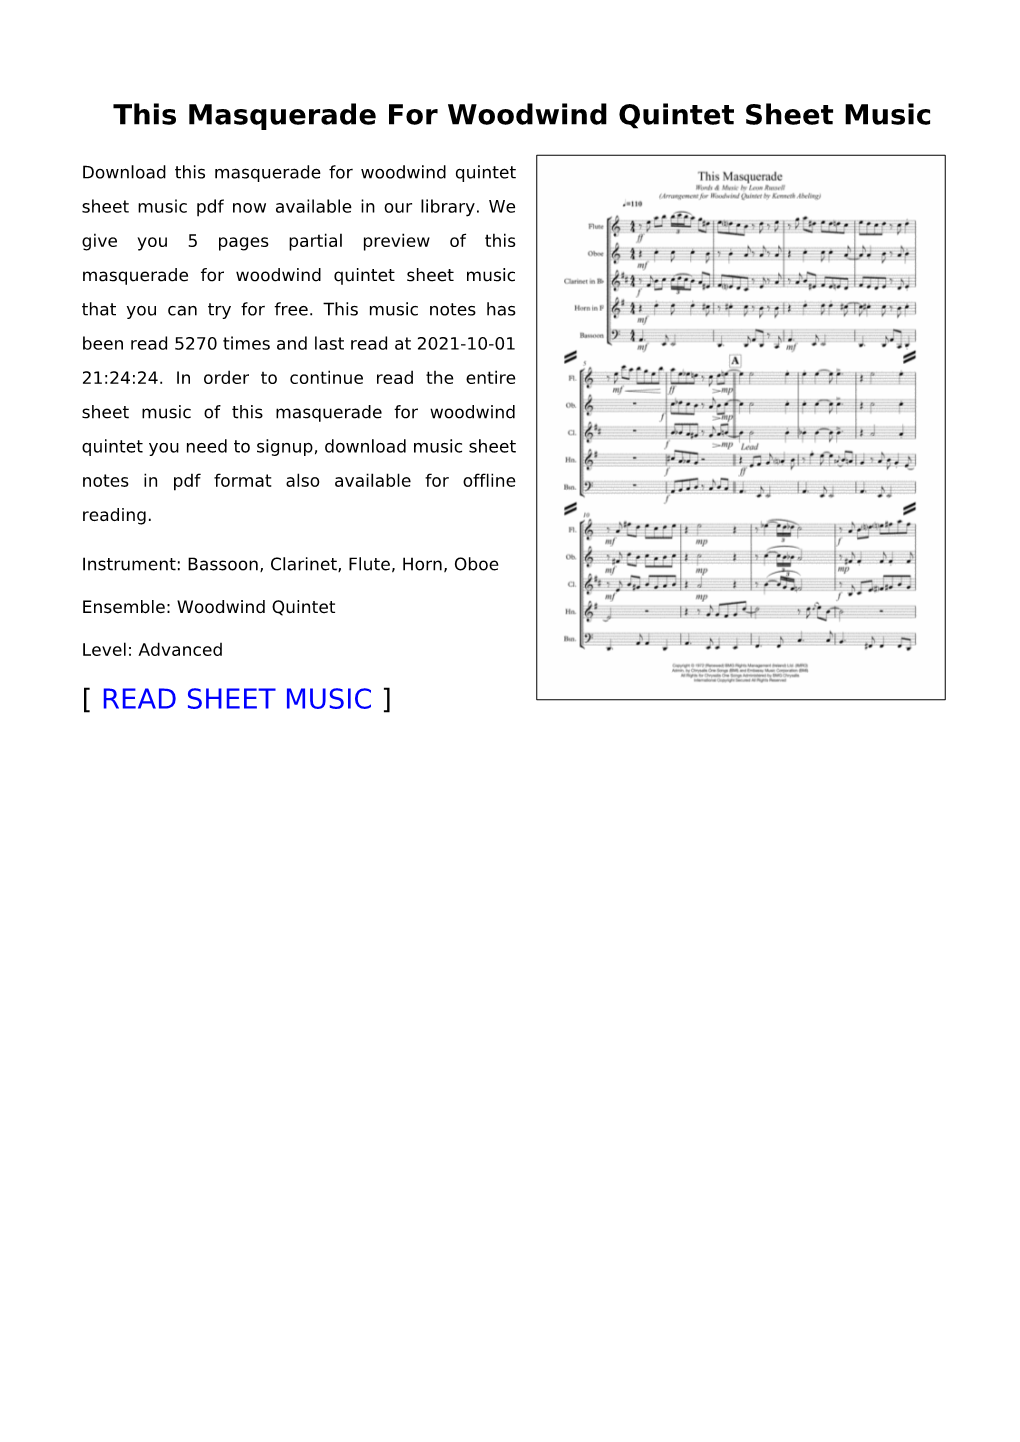 This Masquerade for Woodwind Quintet Sheet Music